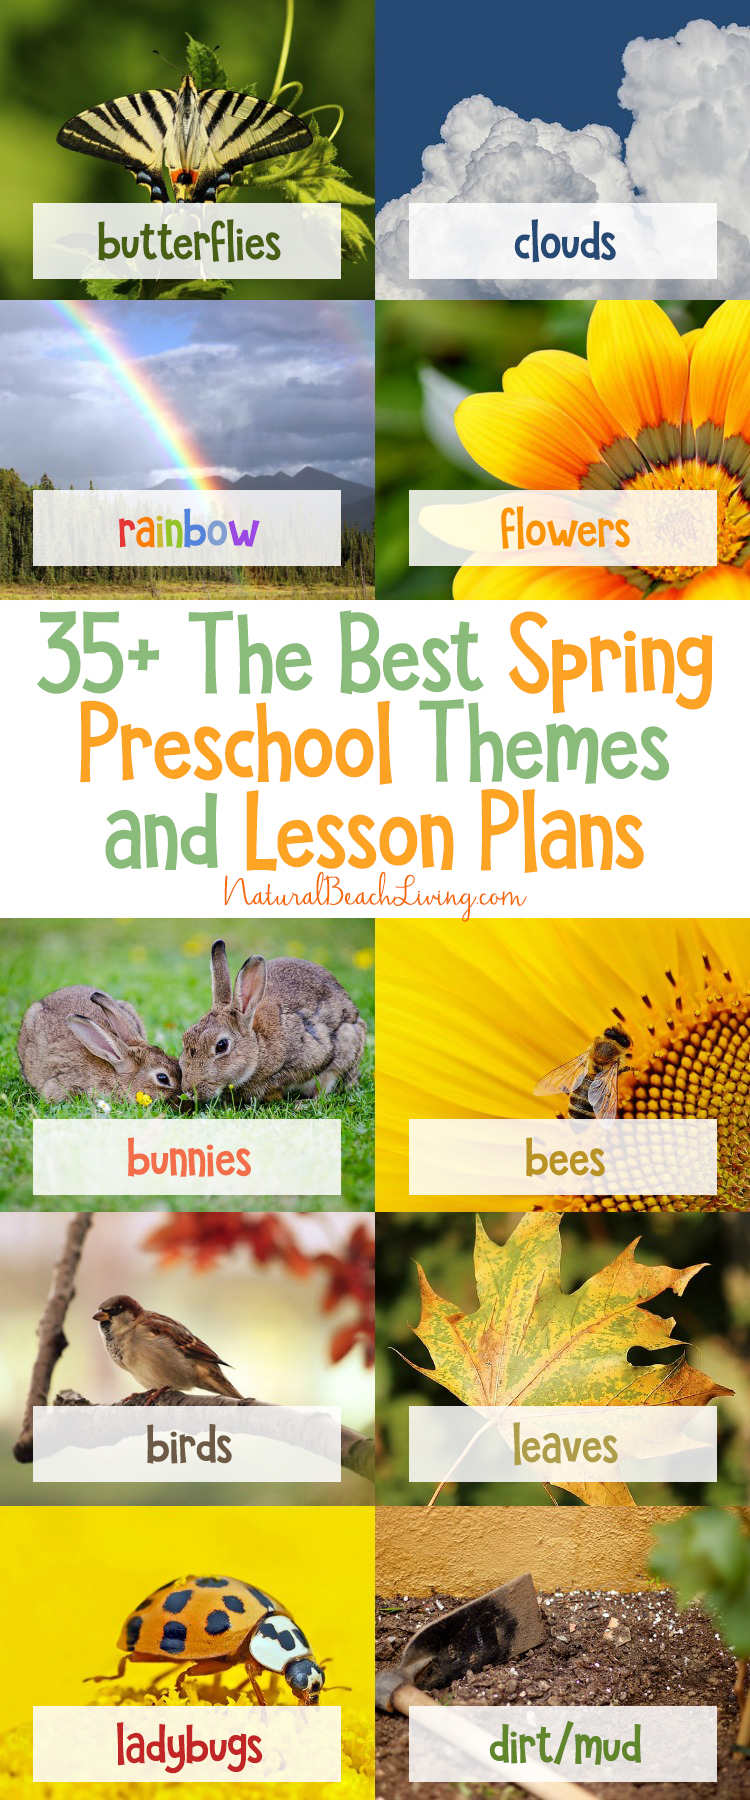 Over 200 Preschool Themes for the Year, Here you will find hundreds of ideas for Preschool Themes for the Whole Year and how to Put together Preschool Lesson Plans, You will also learn How to put together any preschool theme full of preschool math, crafts, Science, Language and hands on activities. 